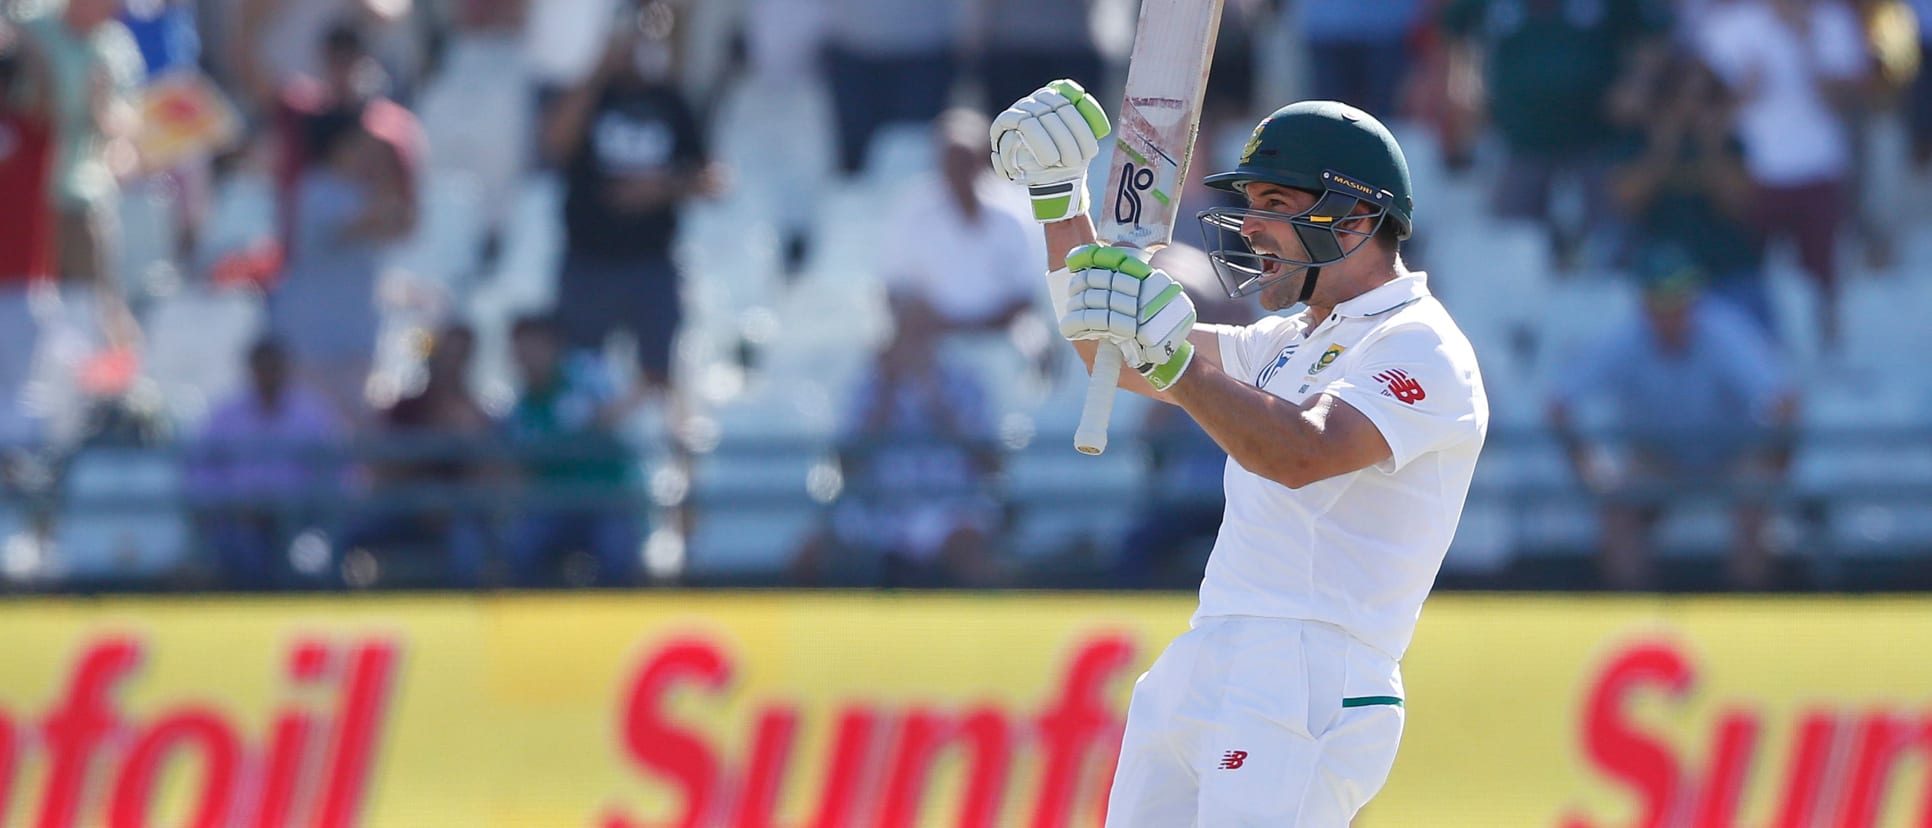 Elgar was the lone warrior for South Africa in the first innings against Australia